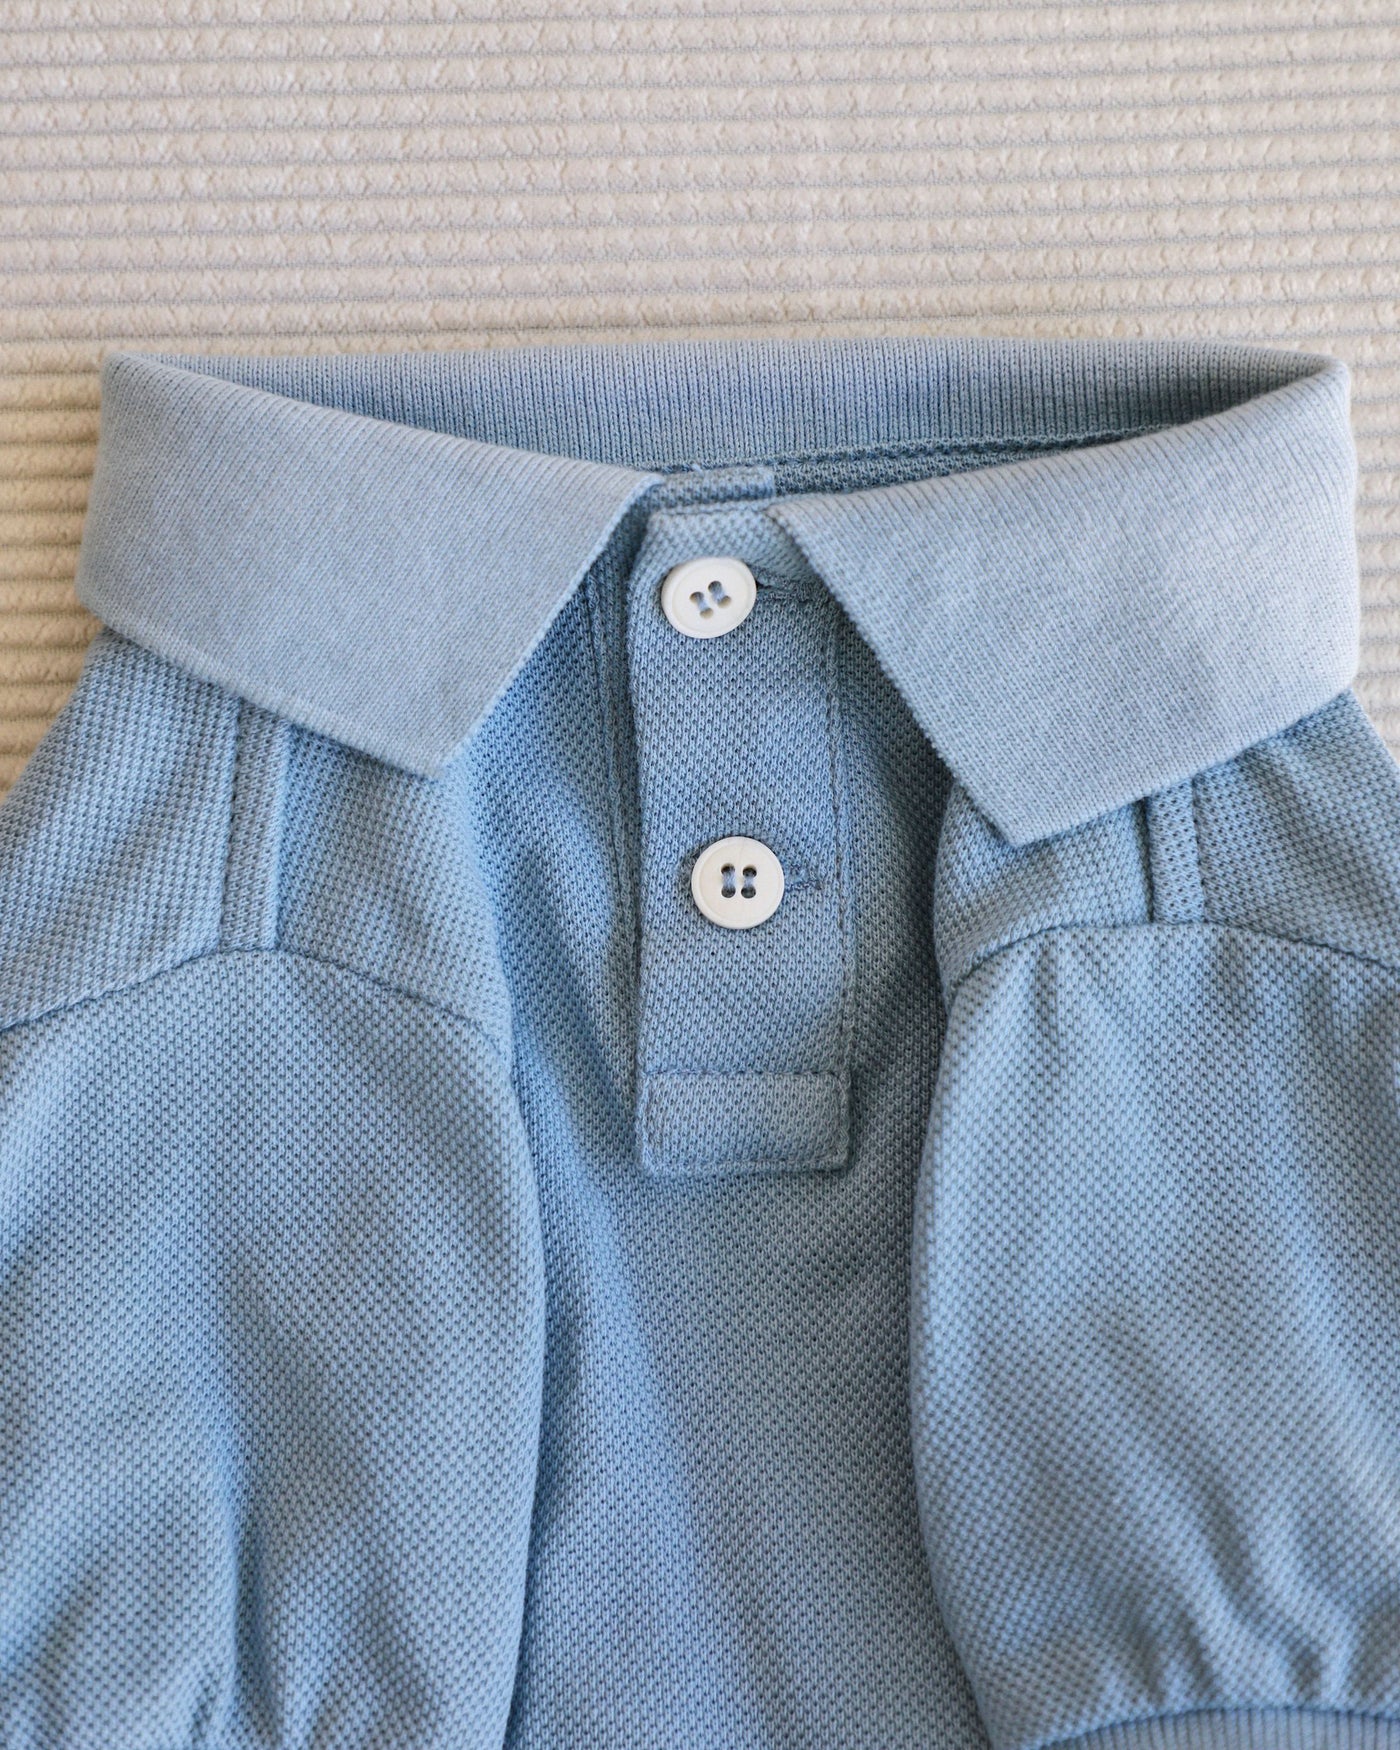 detailed photo of collar and button placard on baby blue dog polo